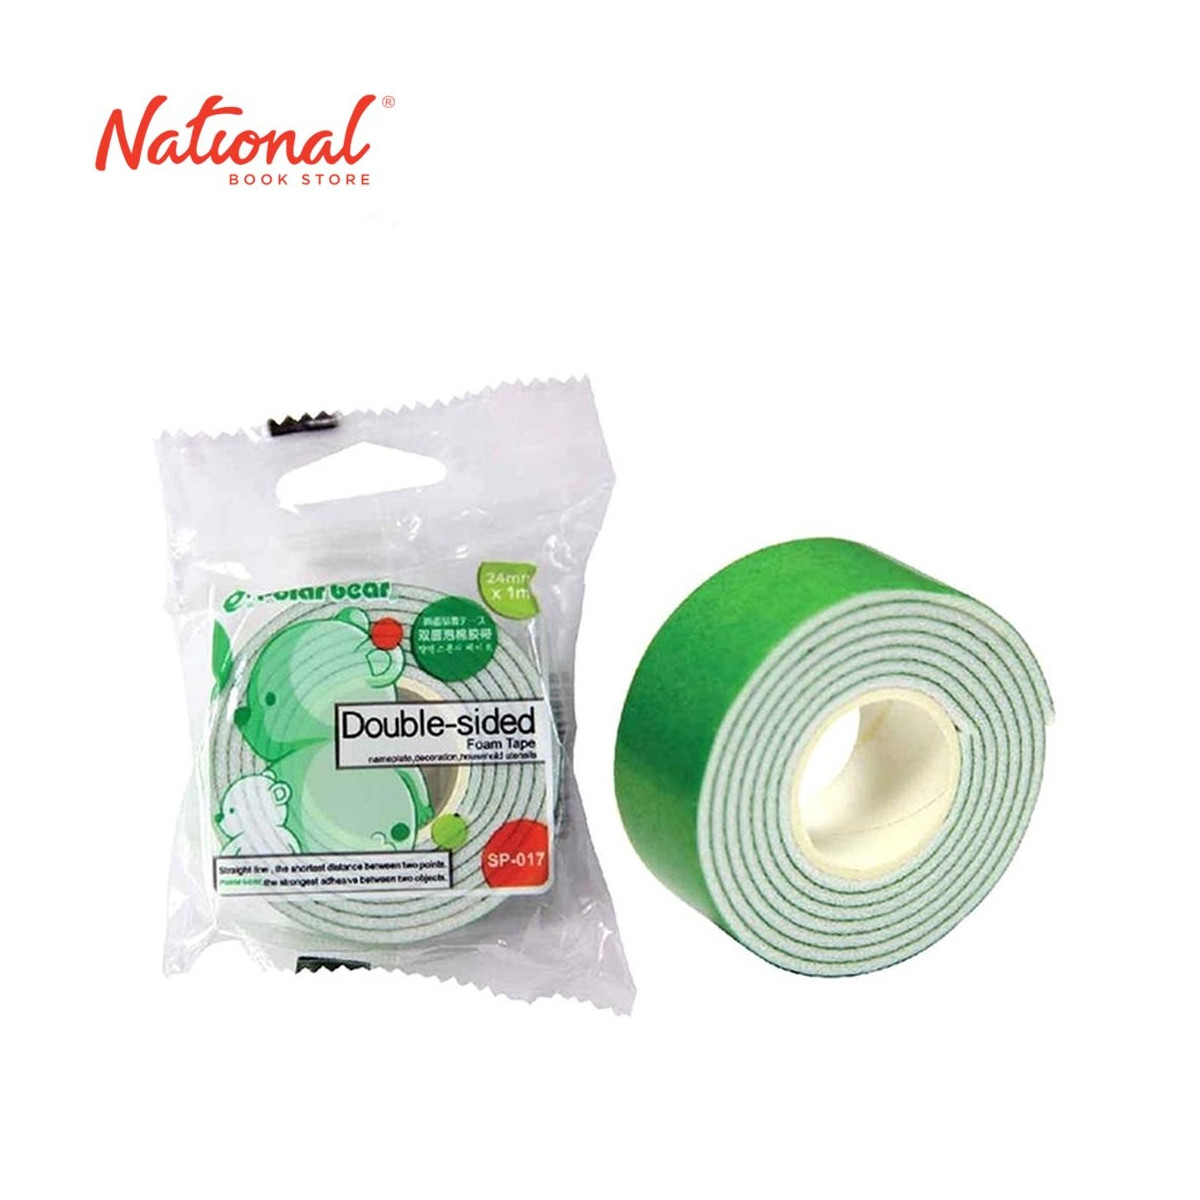 POLARBEAR DOUBLE-SIDED TAPE MOUNT 24MMX1M SMALL ROLL 1.5MM